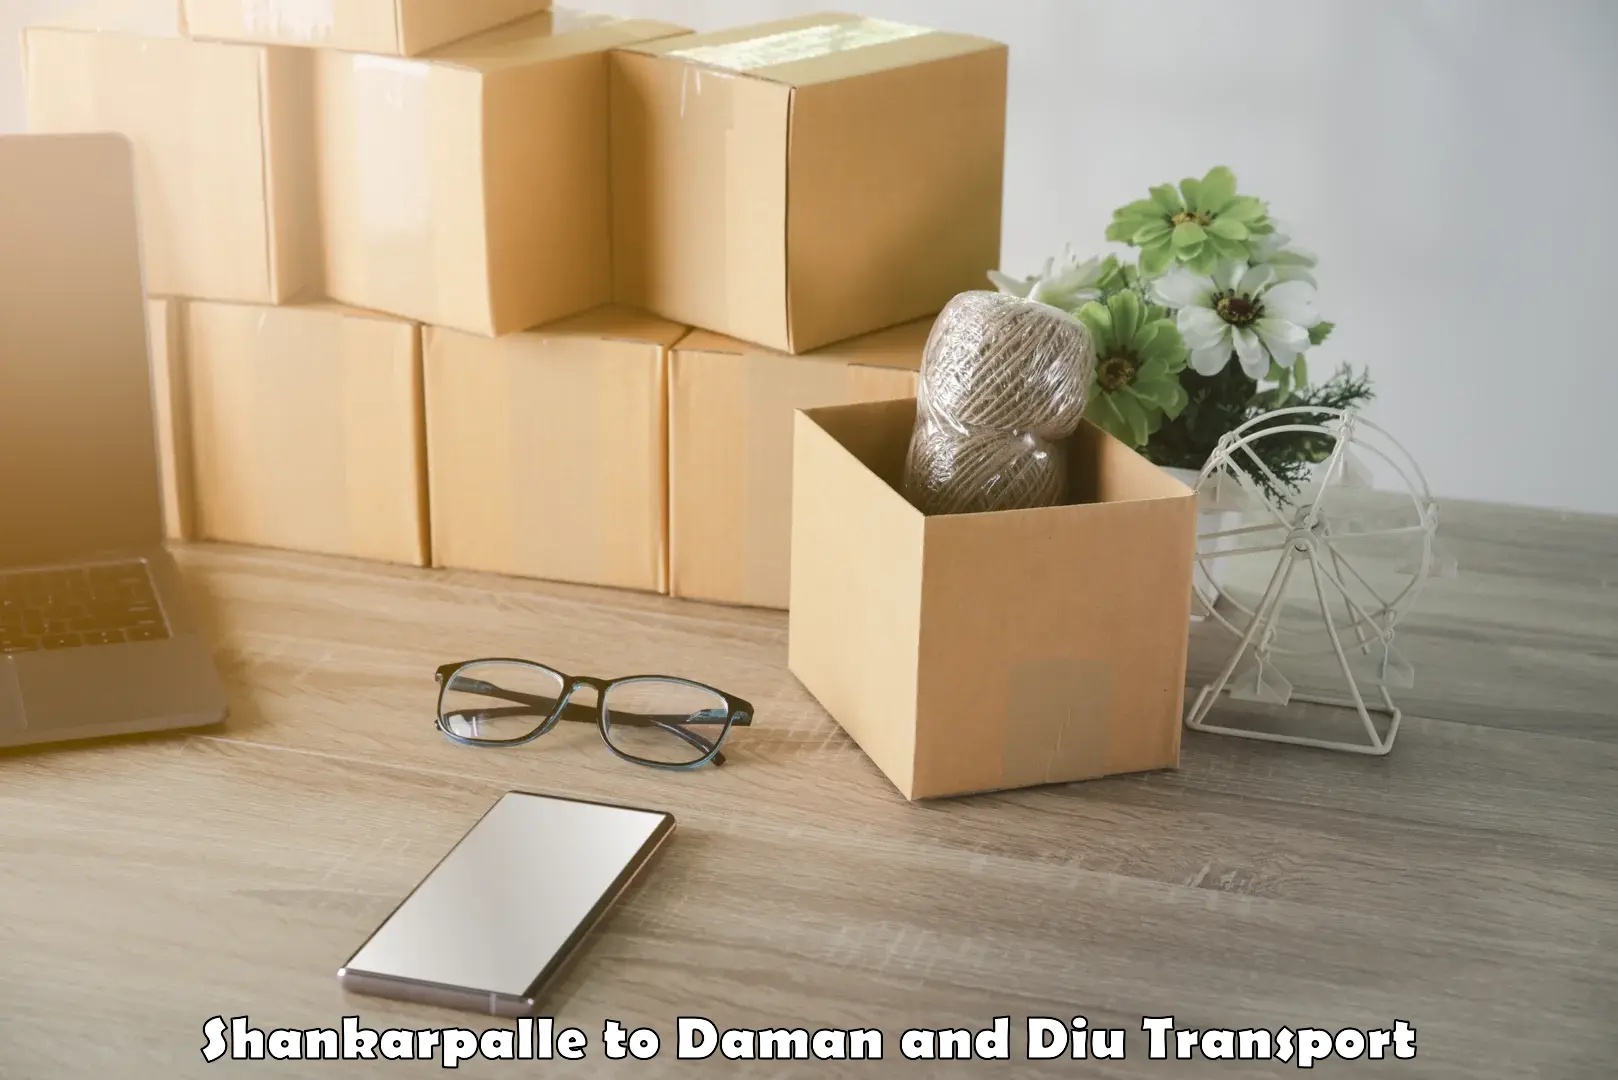 Cargo transportation services Shankarpalle to Daman and Diu